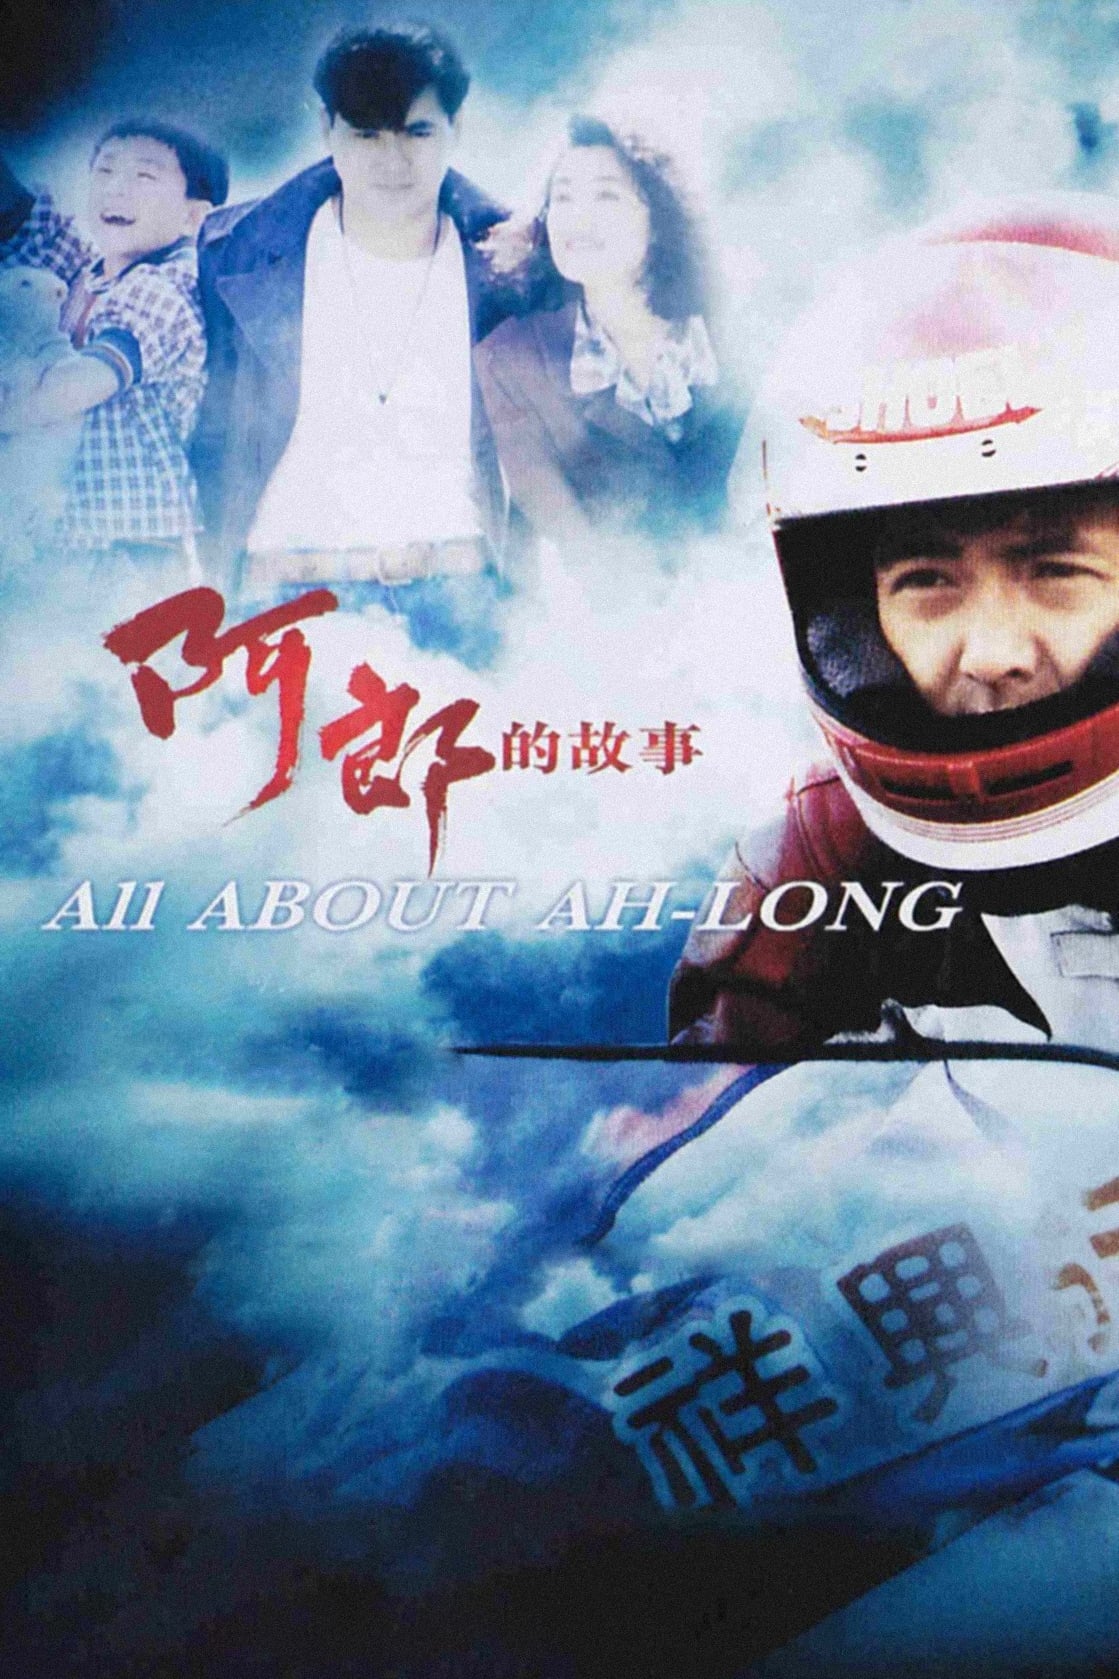 All About Ah-Long